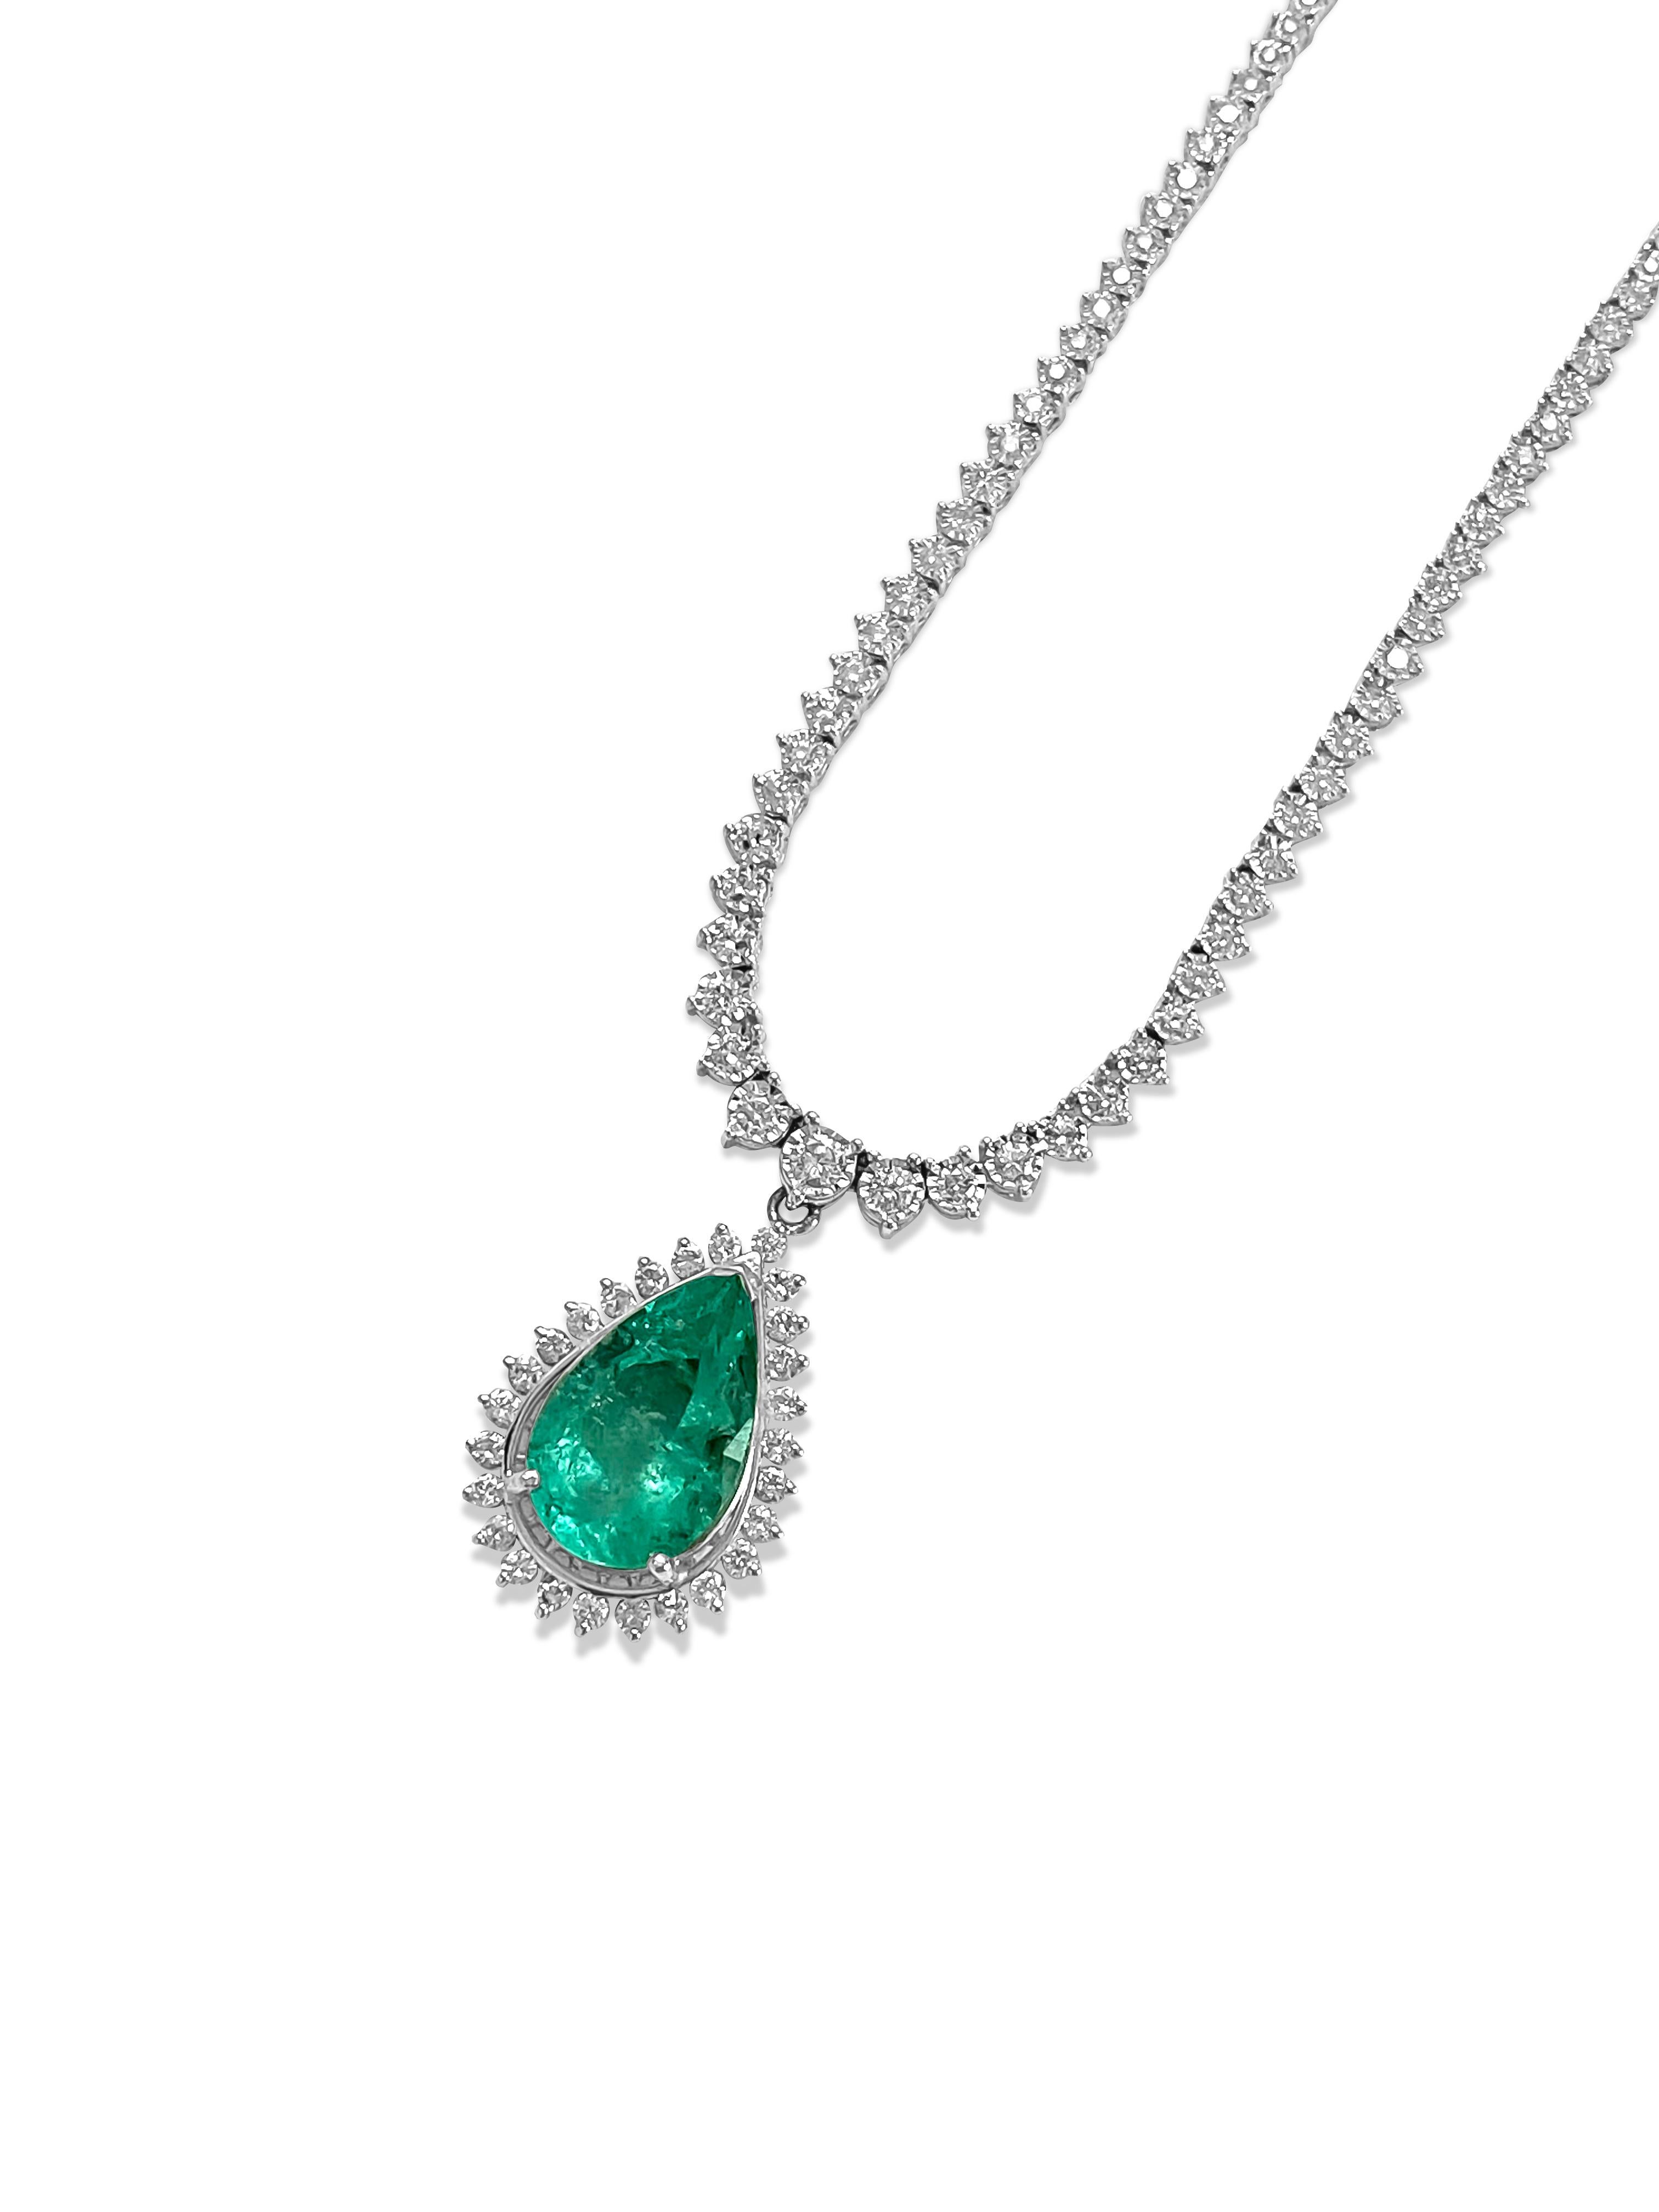 Contemporary Certified 12.00 Carat Colombian Emerald Diamond Necklace 14 Karat White Gold For Sale